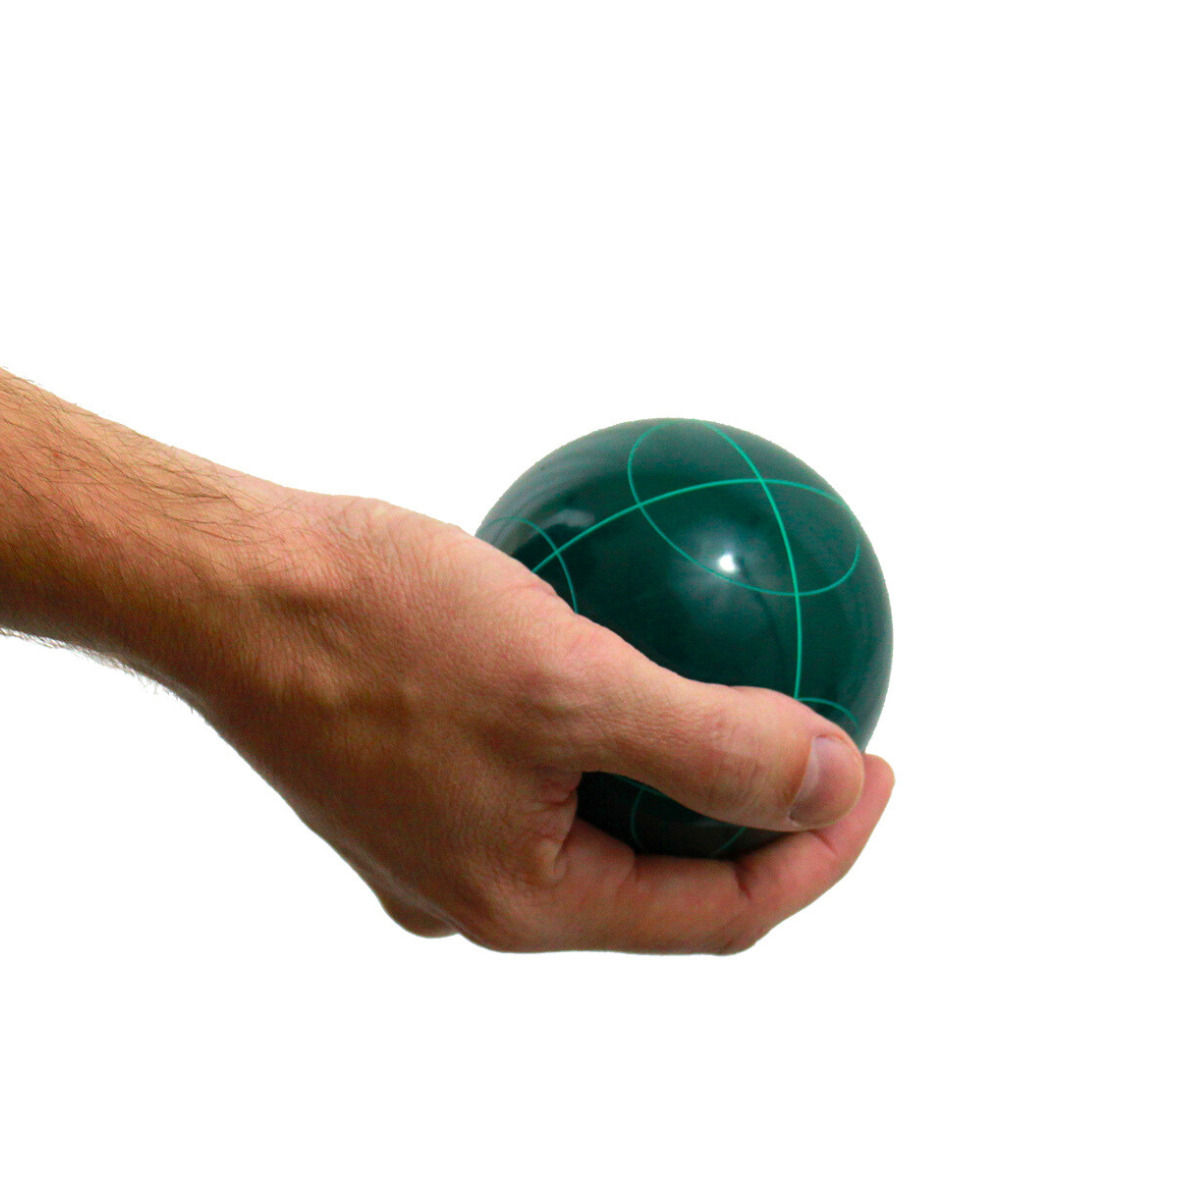 The Baden Champions Bocce Set